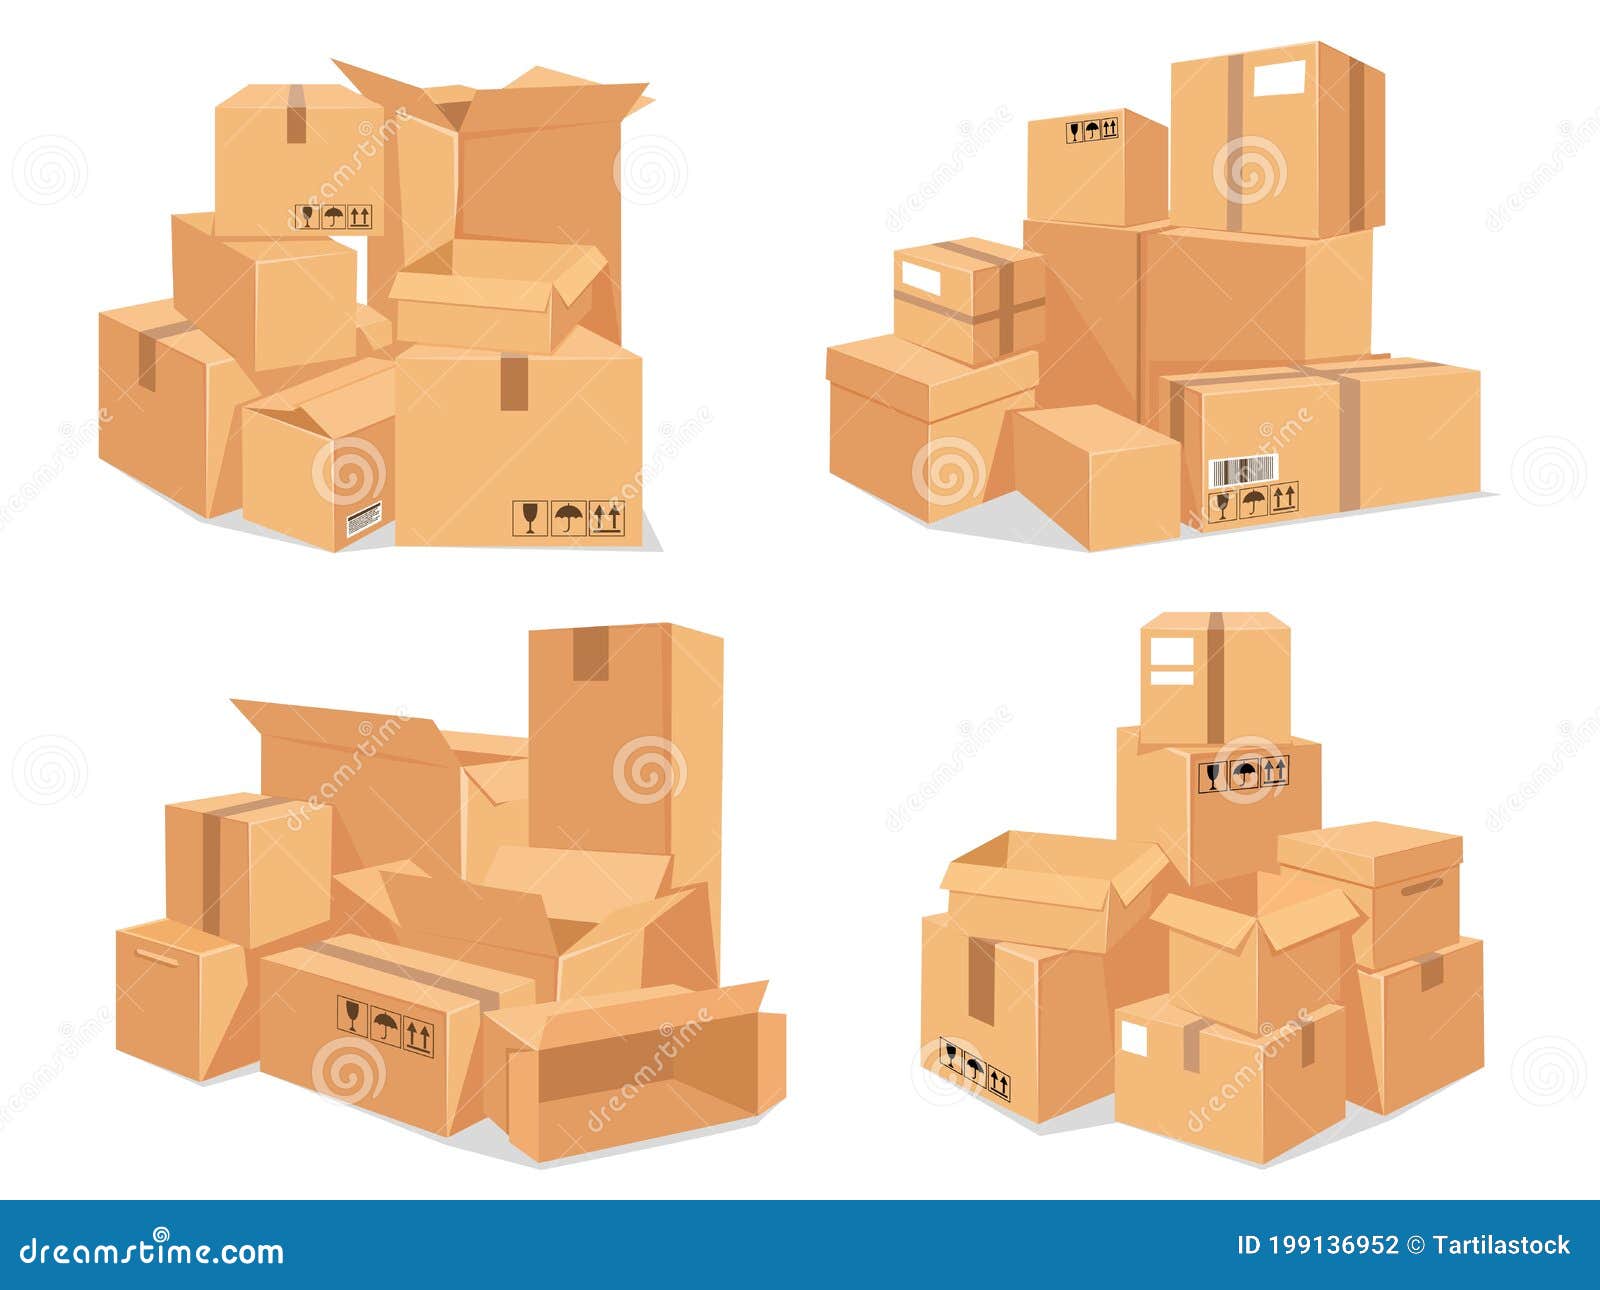 Carton Box Stack. Big Pile of Delivery Brown Cardboard Boxes. Cartoon  Stacked Warehouse Parcels Stock Vector - Illustration of group, cargo:  199136952